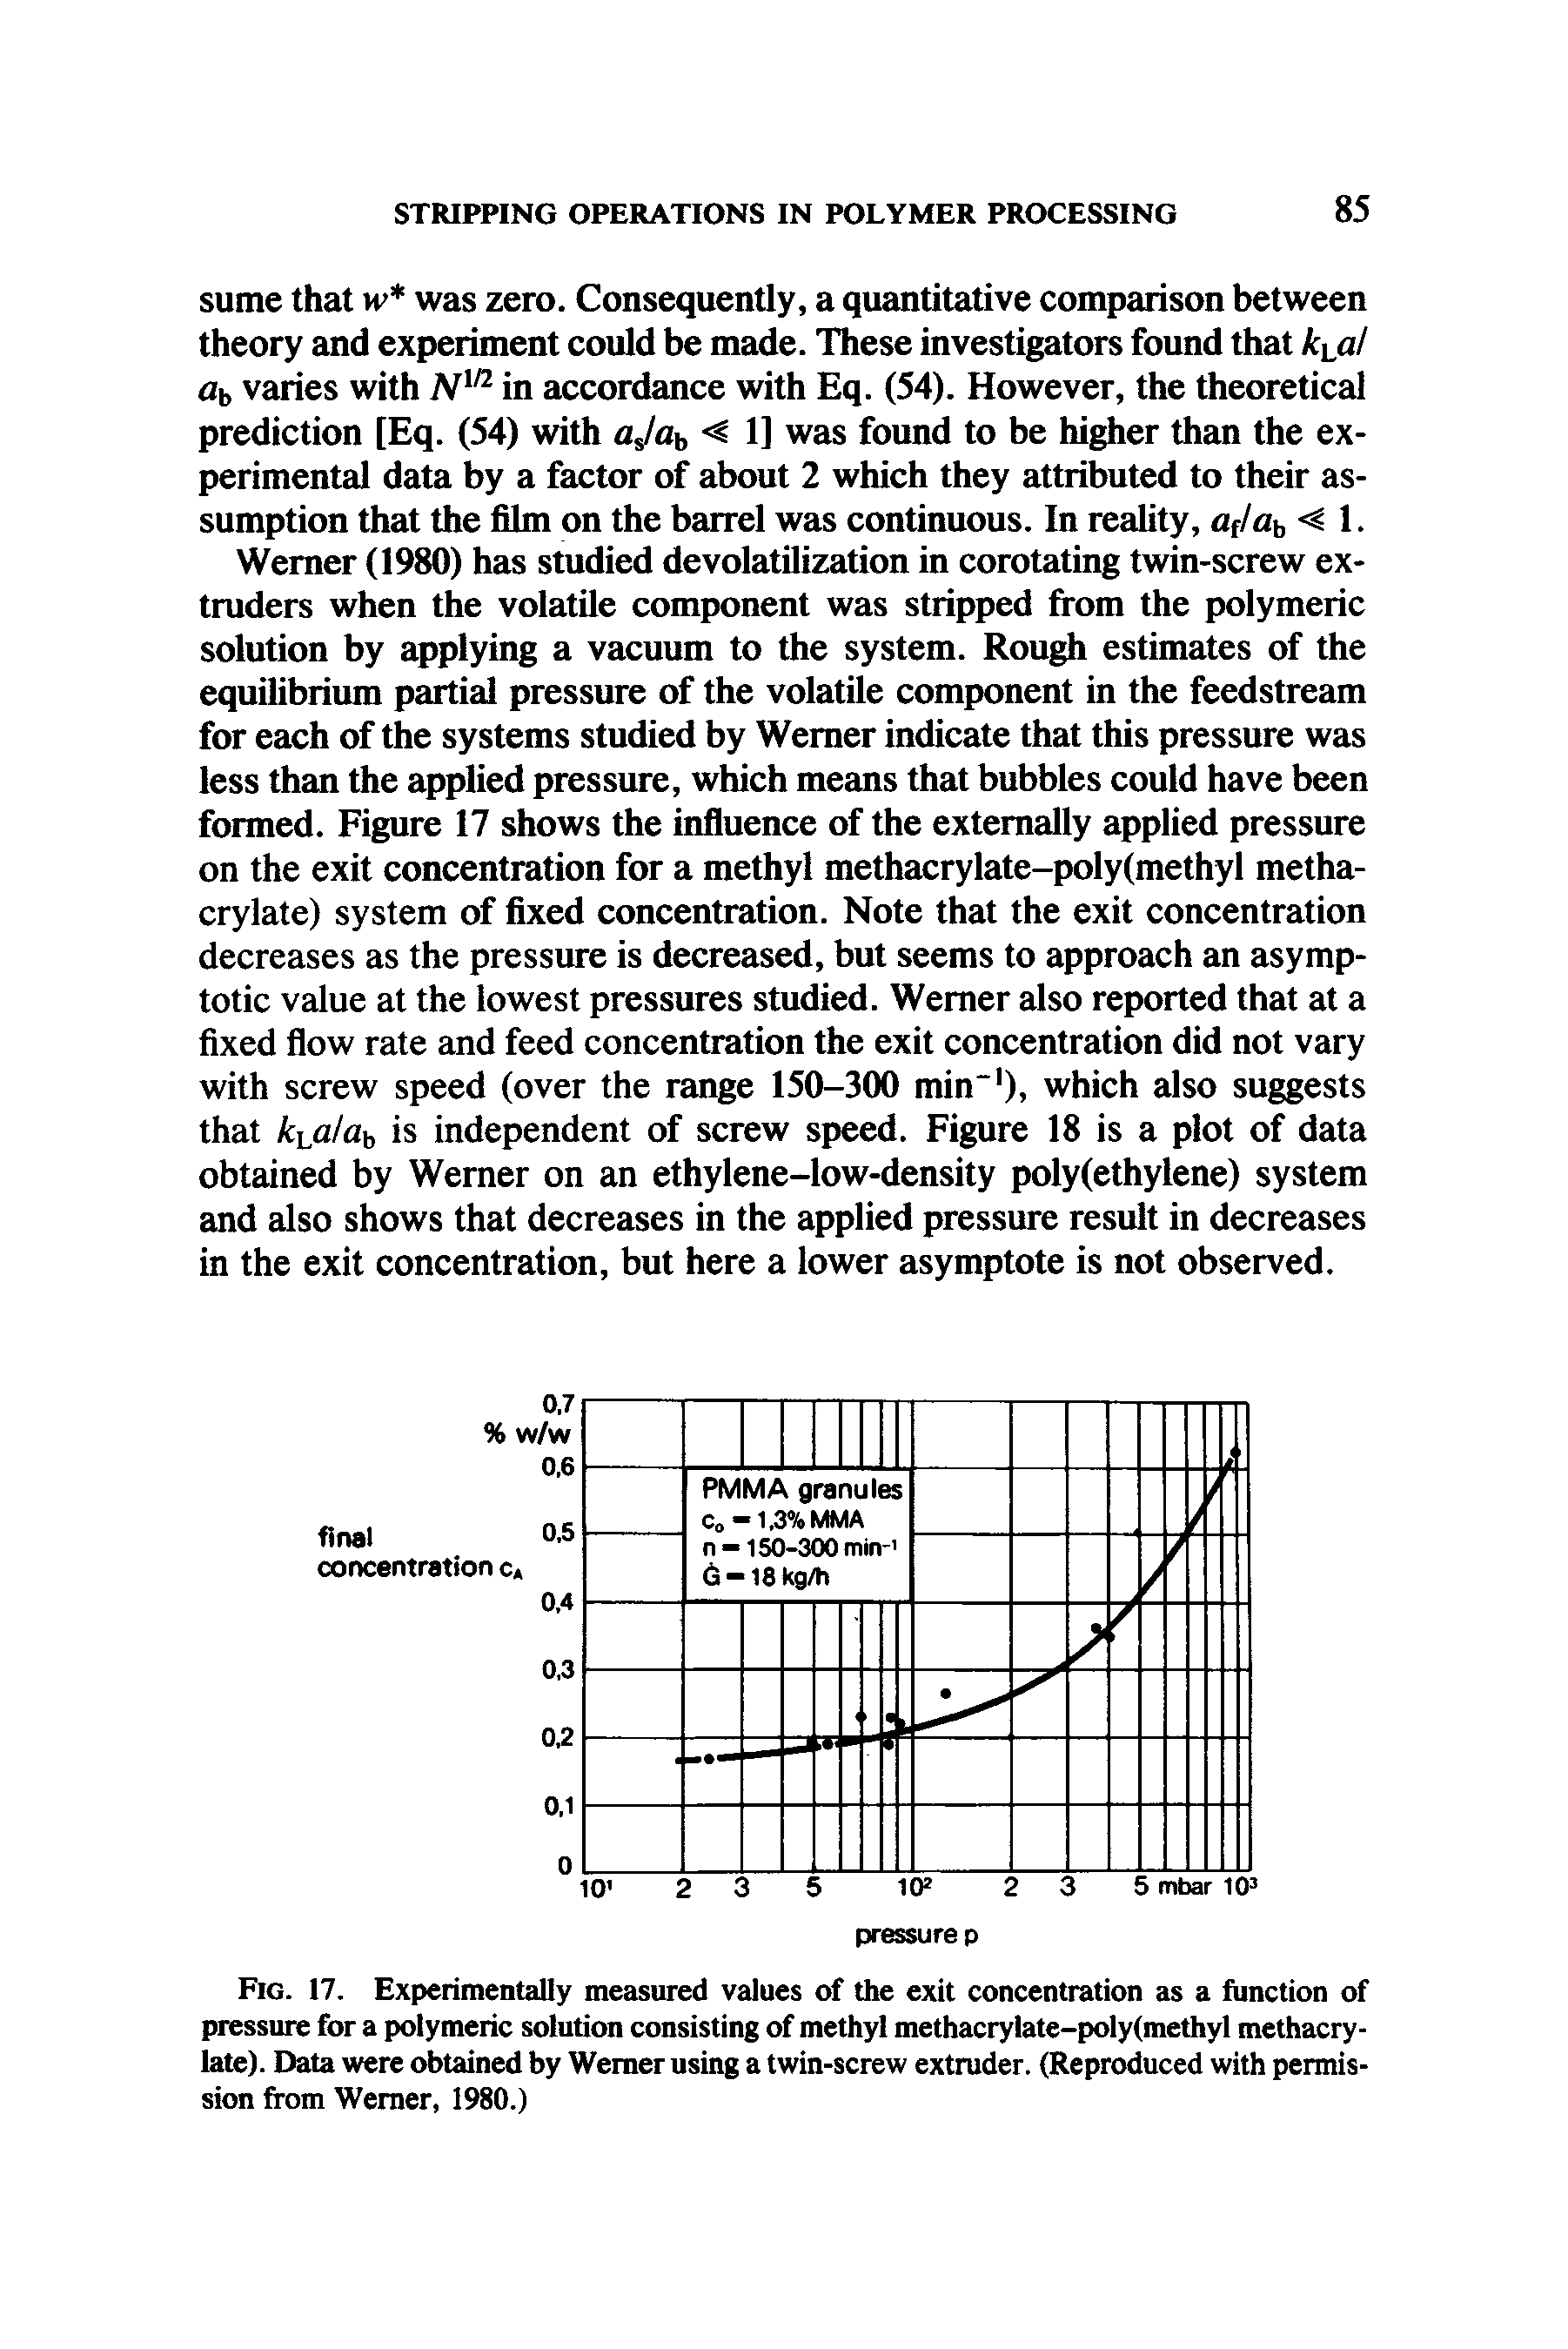 Fig. 17. Experimentally measured values of the exit concentration as a function of pressure for a polymeric solution consisting of methyl methacrylate-polyfmethyl methacrylate). Data were obtained by Werner using a twin-screw extruder. (Reproduced with permission from Werner, 1980.)...